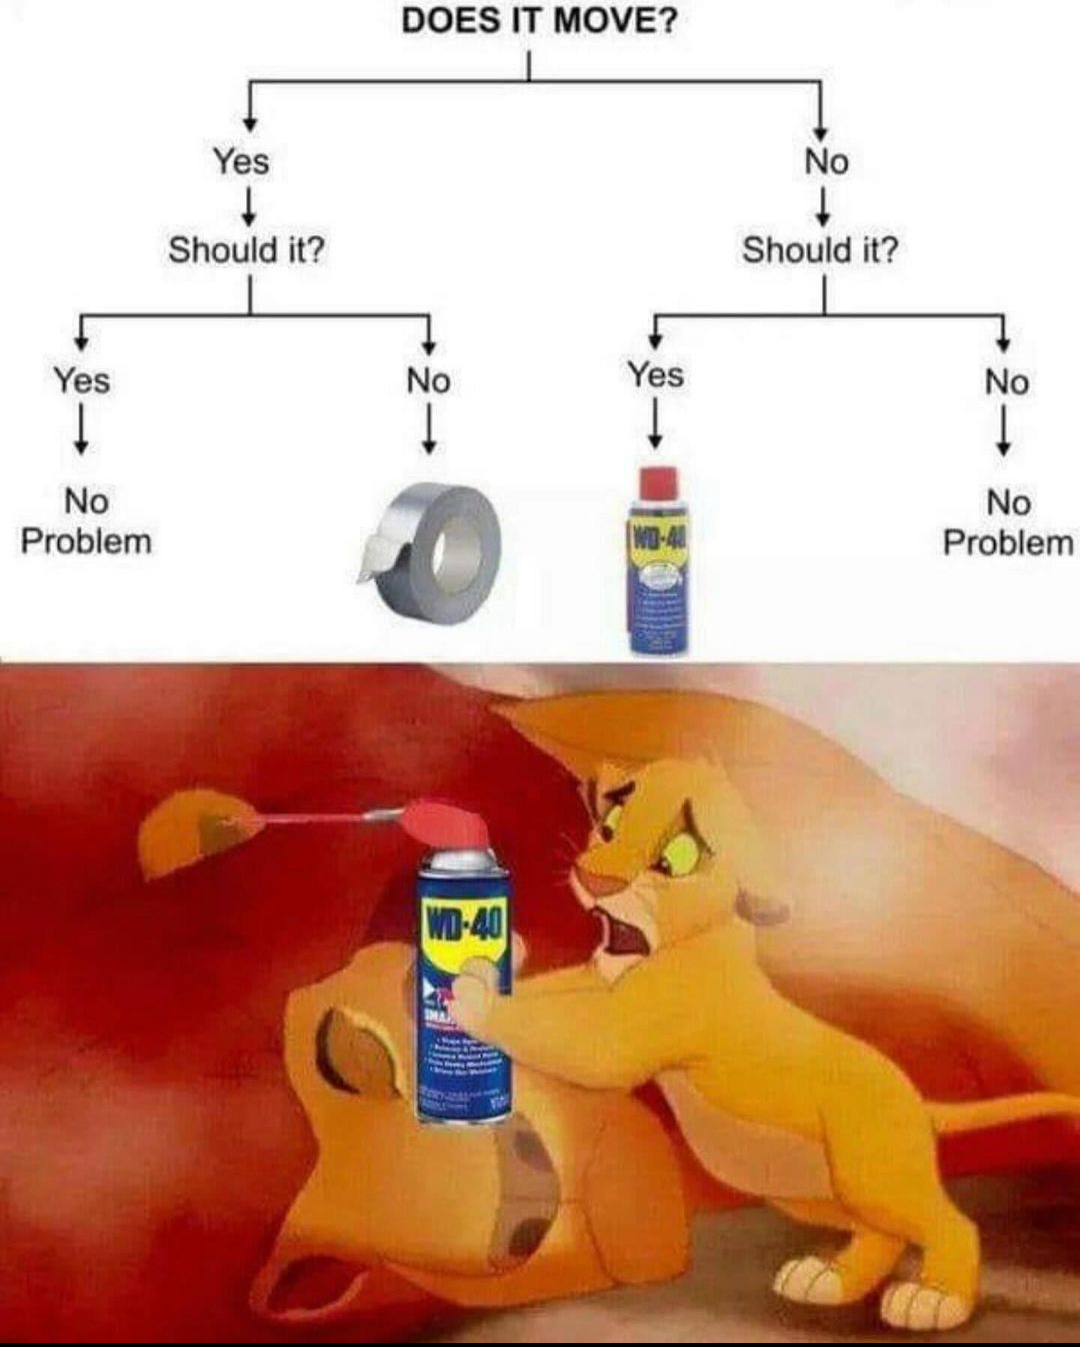 wd-40-fixes-everything-v0-5cr1wnt5soqc1.png